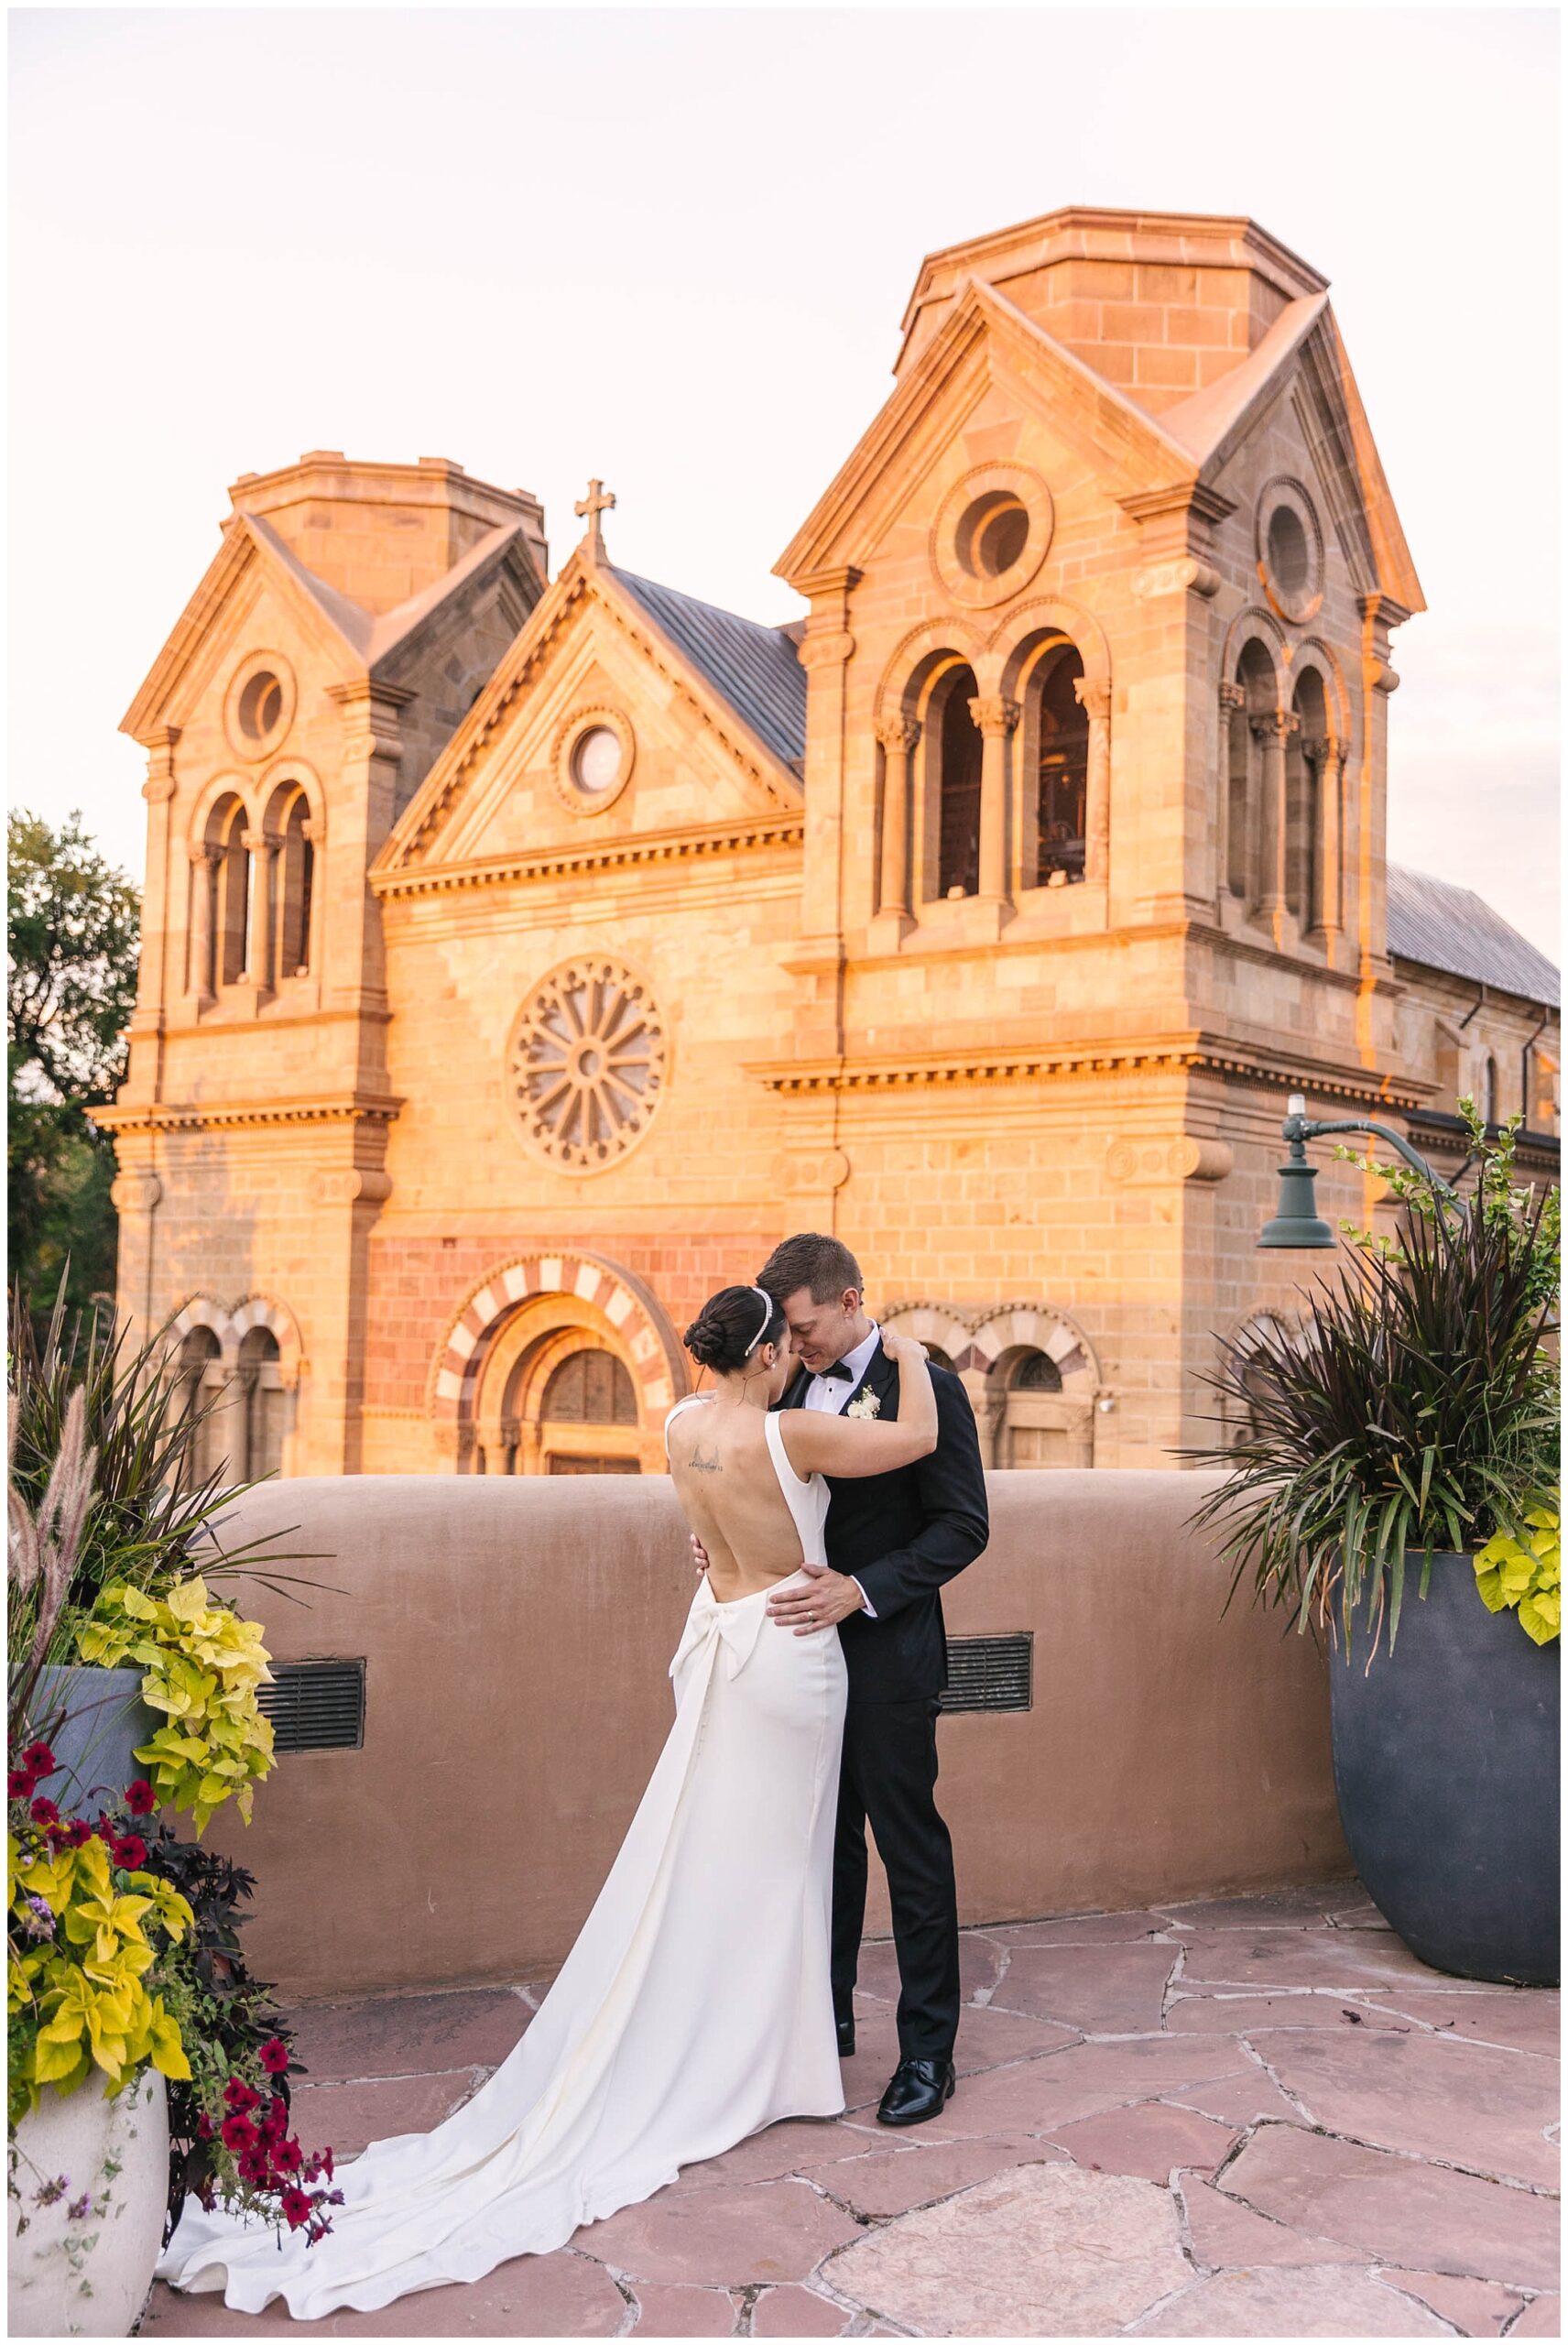 Sunset portraits of bride and groom at La Fonda on the Plaza wedding by Santa Fe Cathedral Basilica